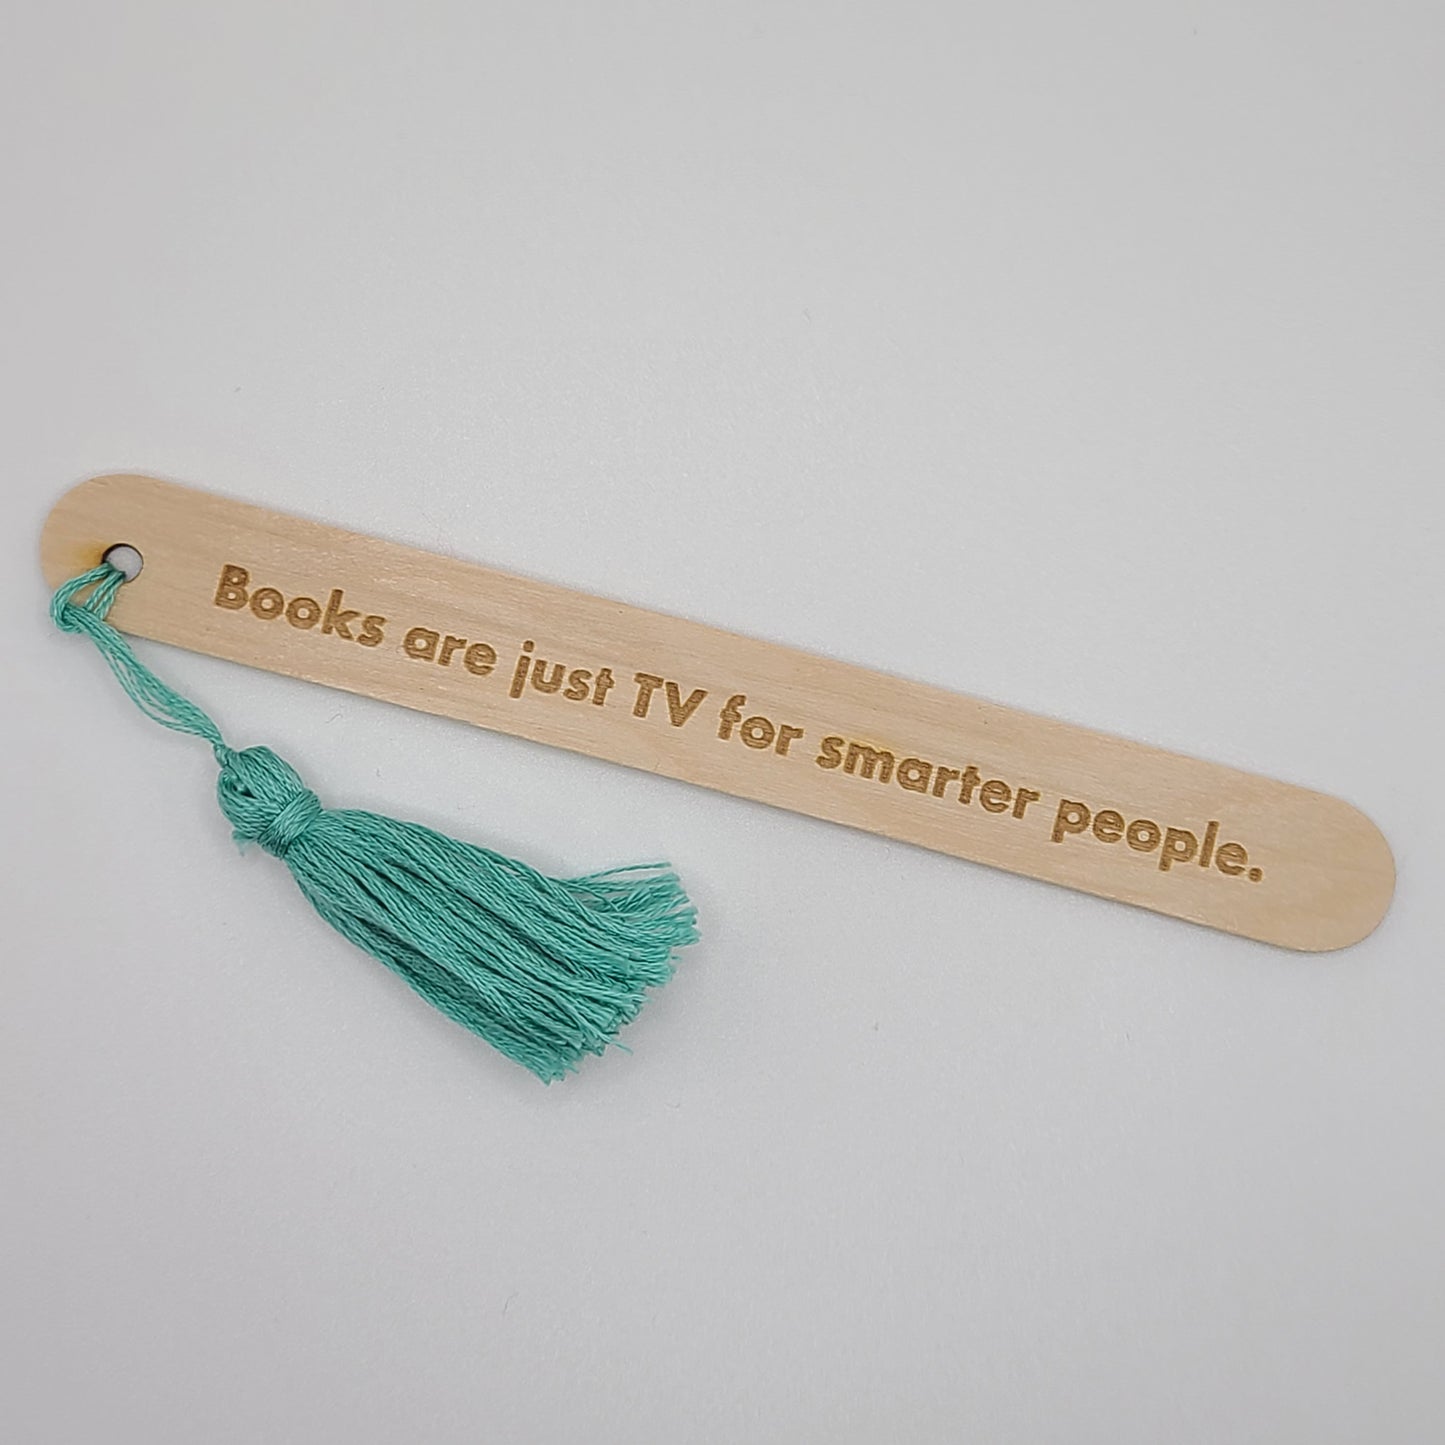 "Books are just TV for smarter people." popsicle bookmark